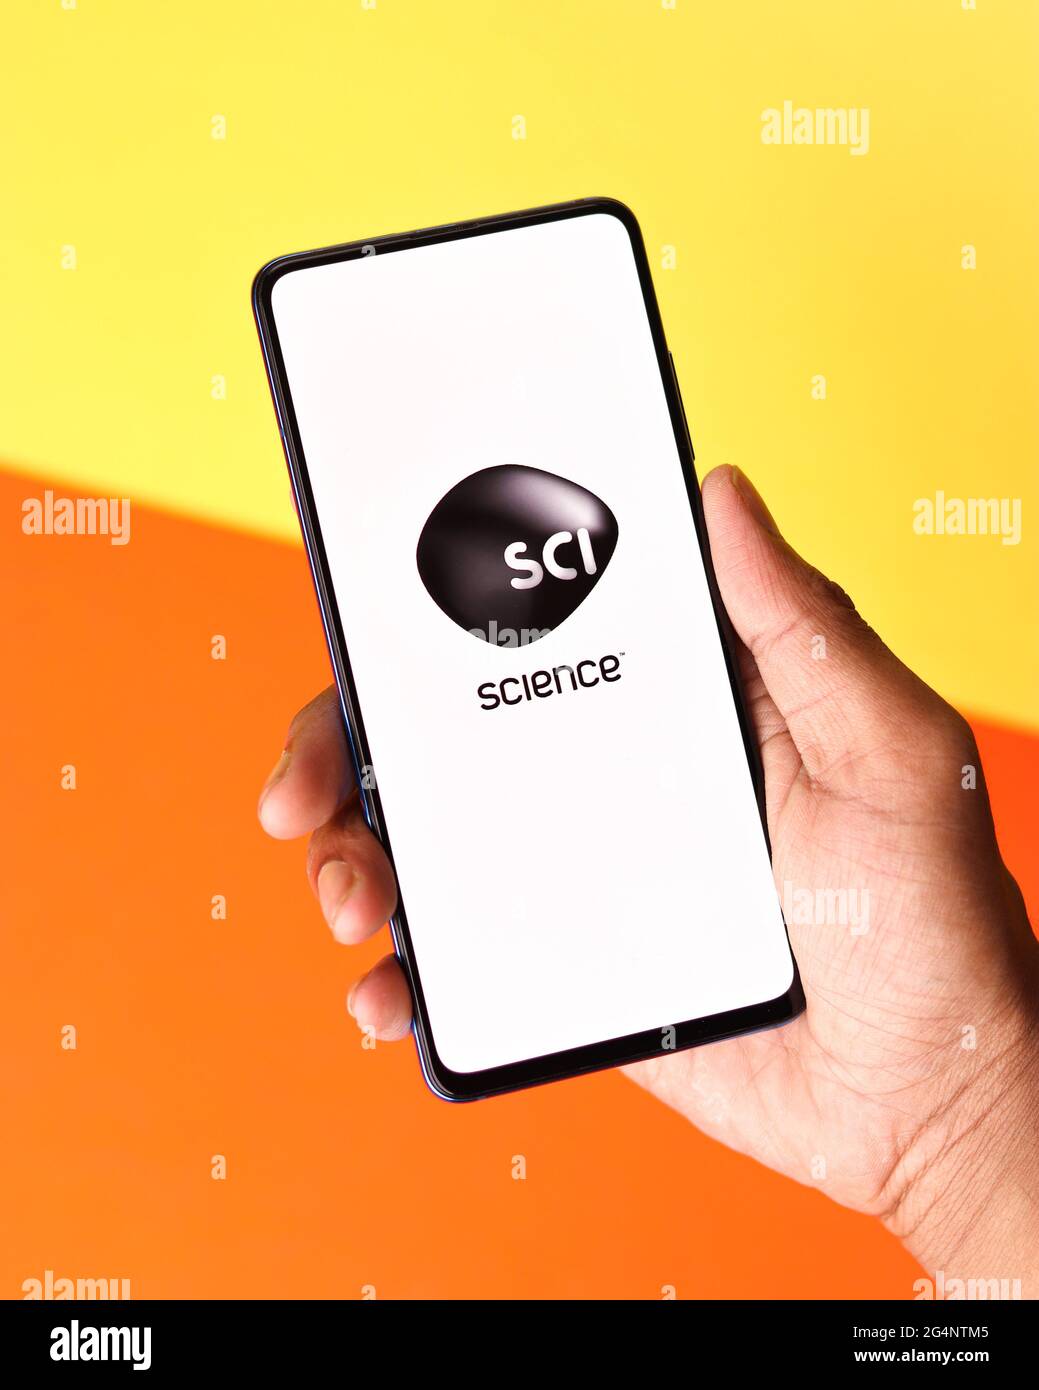 Discovery science logo on phone screen stock image. Stock Photo